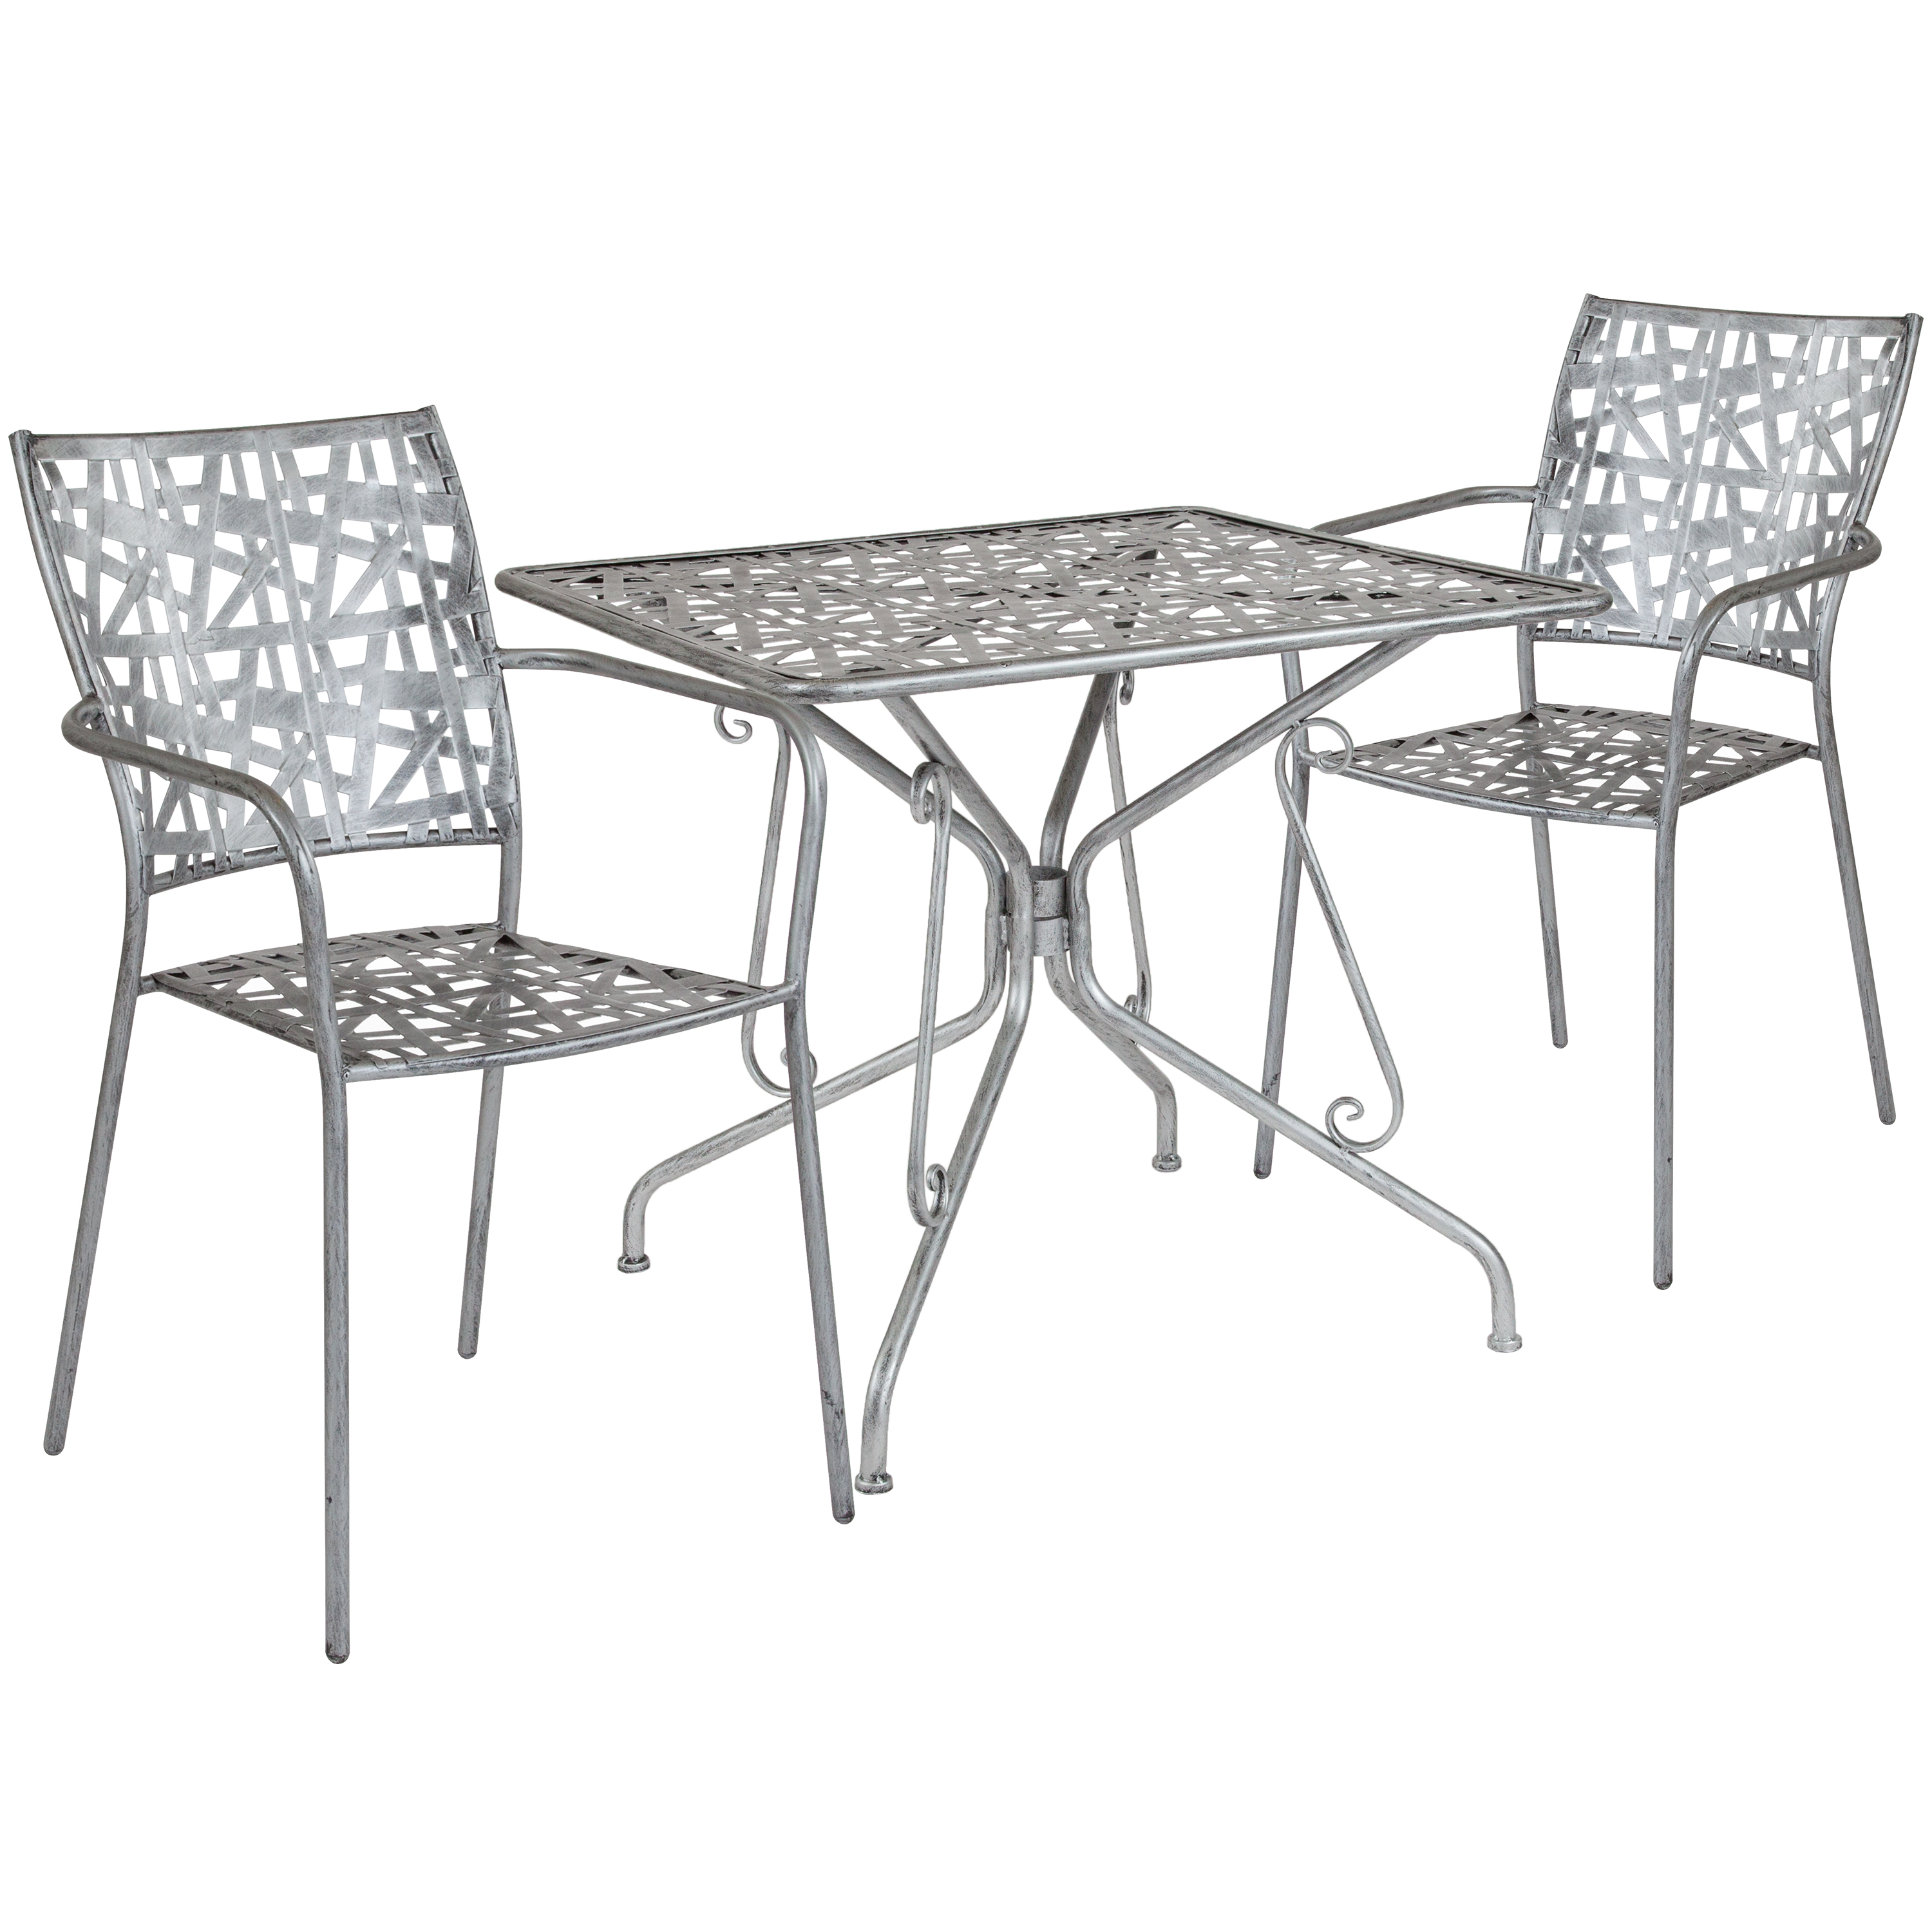 Flash Furniture Agostina Series 31.5" Square Antique Silver Indoor-Outdoor Steel Patio Table with 2 Stack Chairs - image 1 of 4